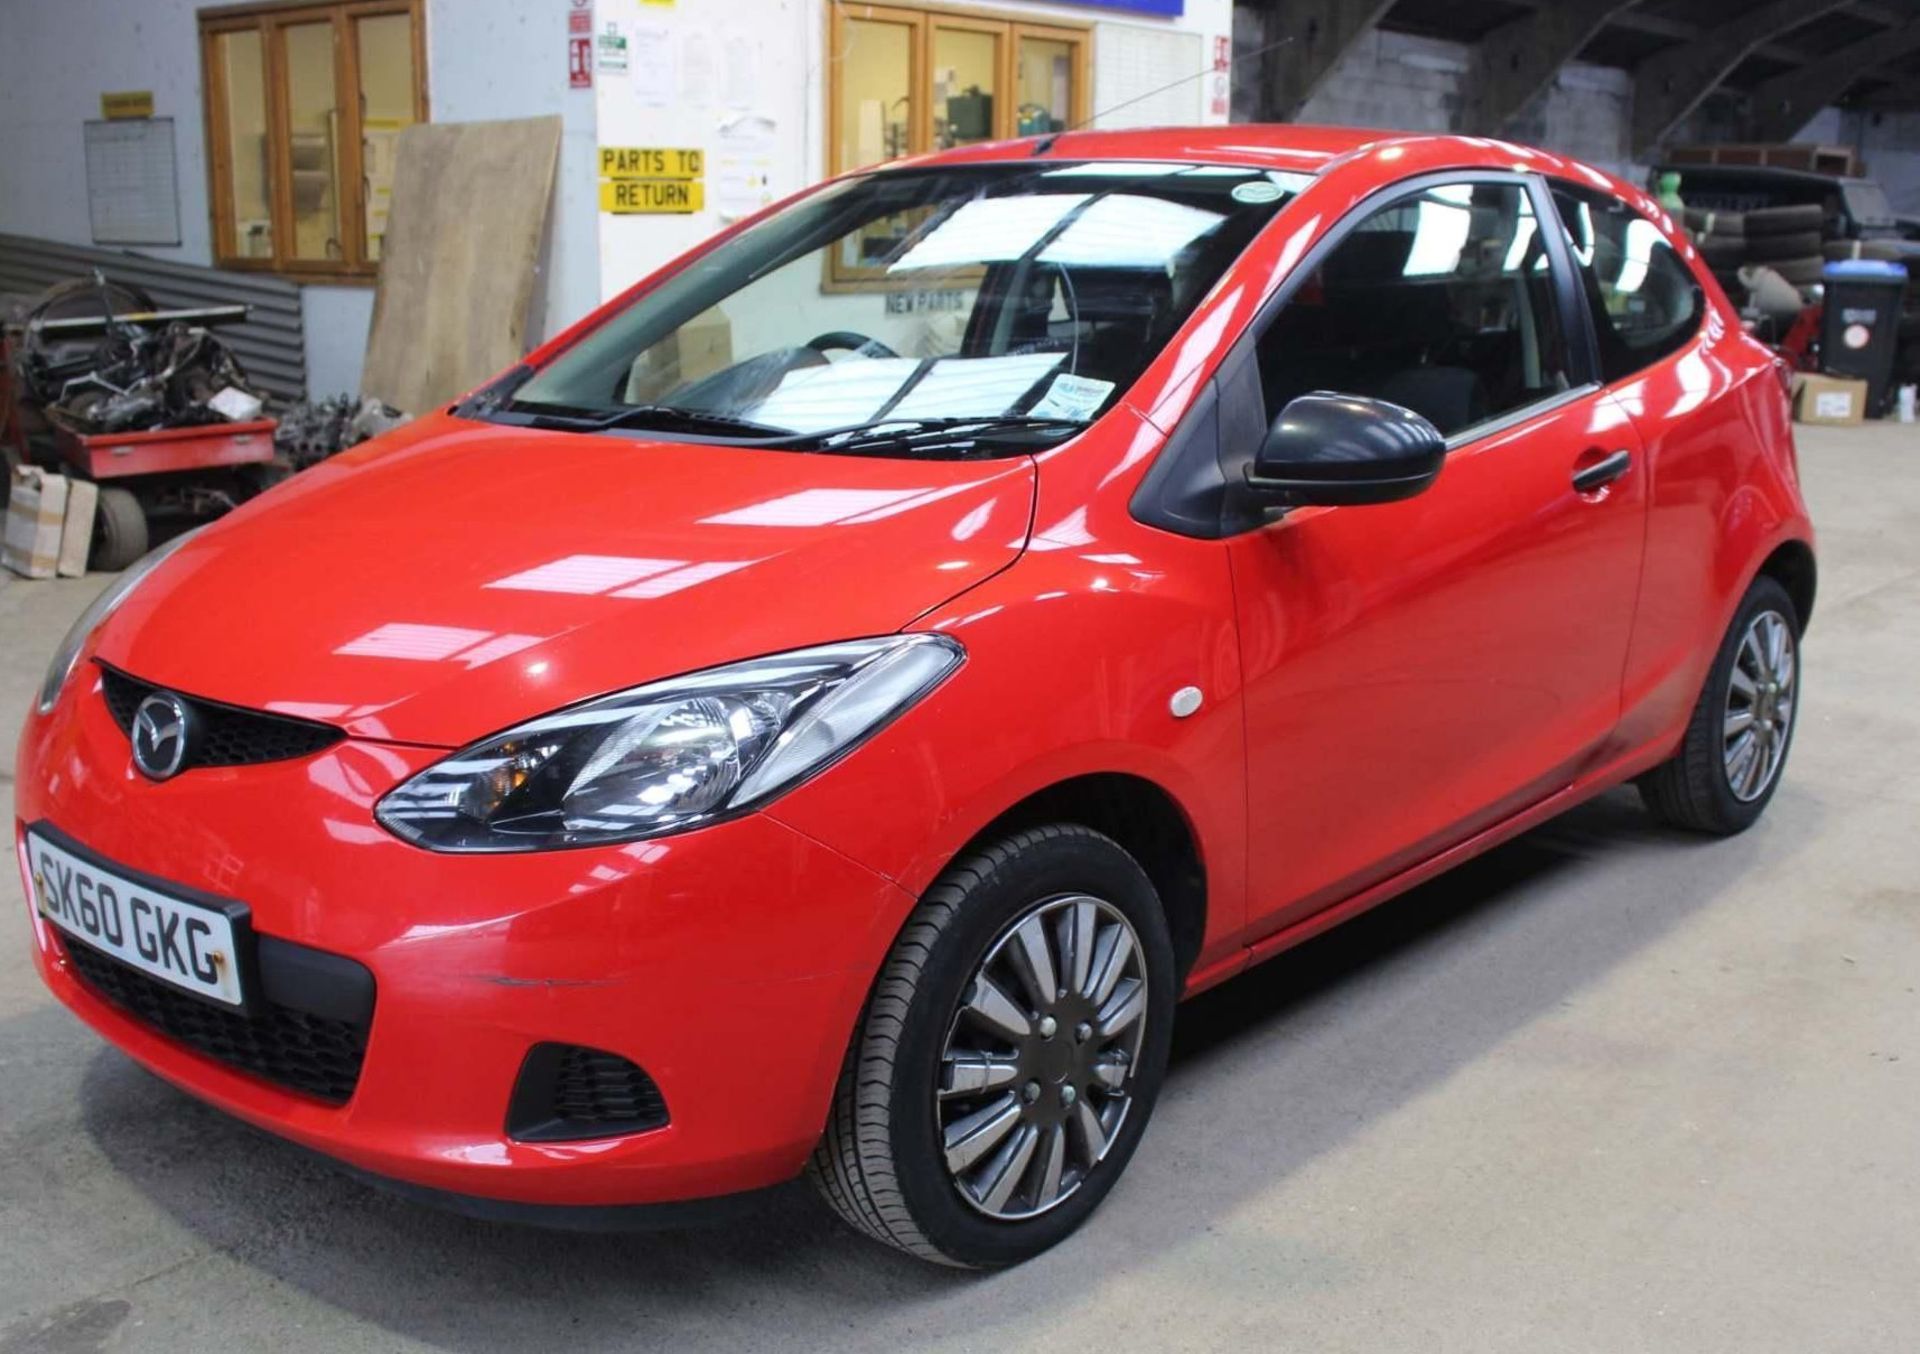 2010 Mazda2 1.3 TS 3Dr Hatchback - CL505 - NO VAT ON THE HAMMER - Location: Corby, Northamptonshire<